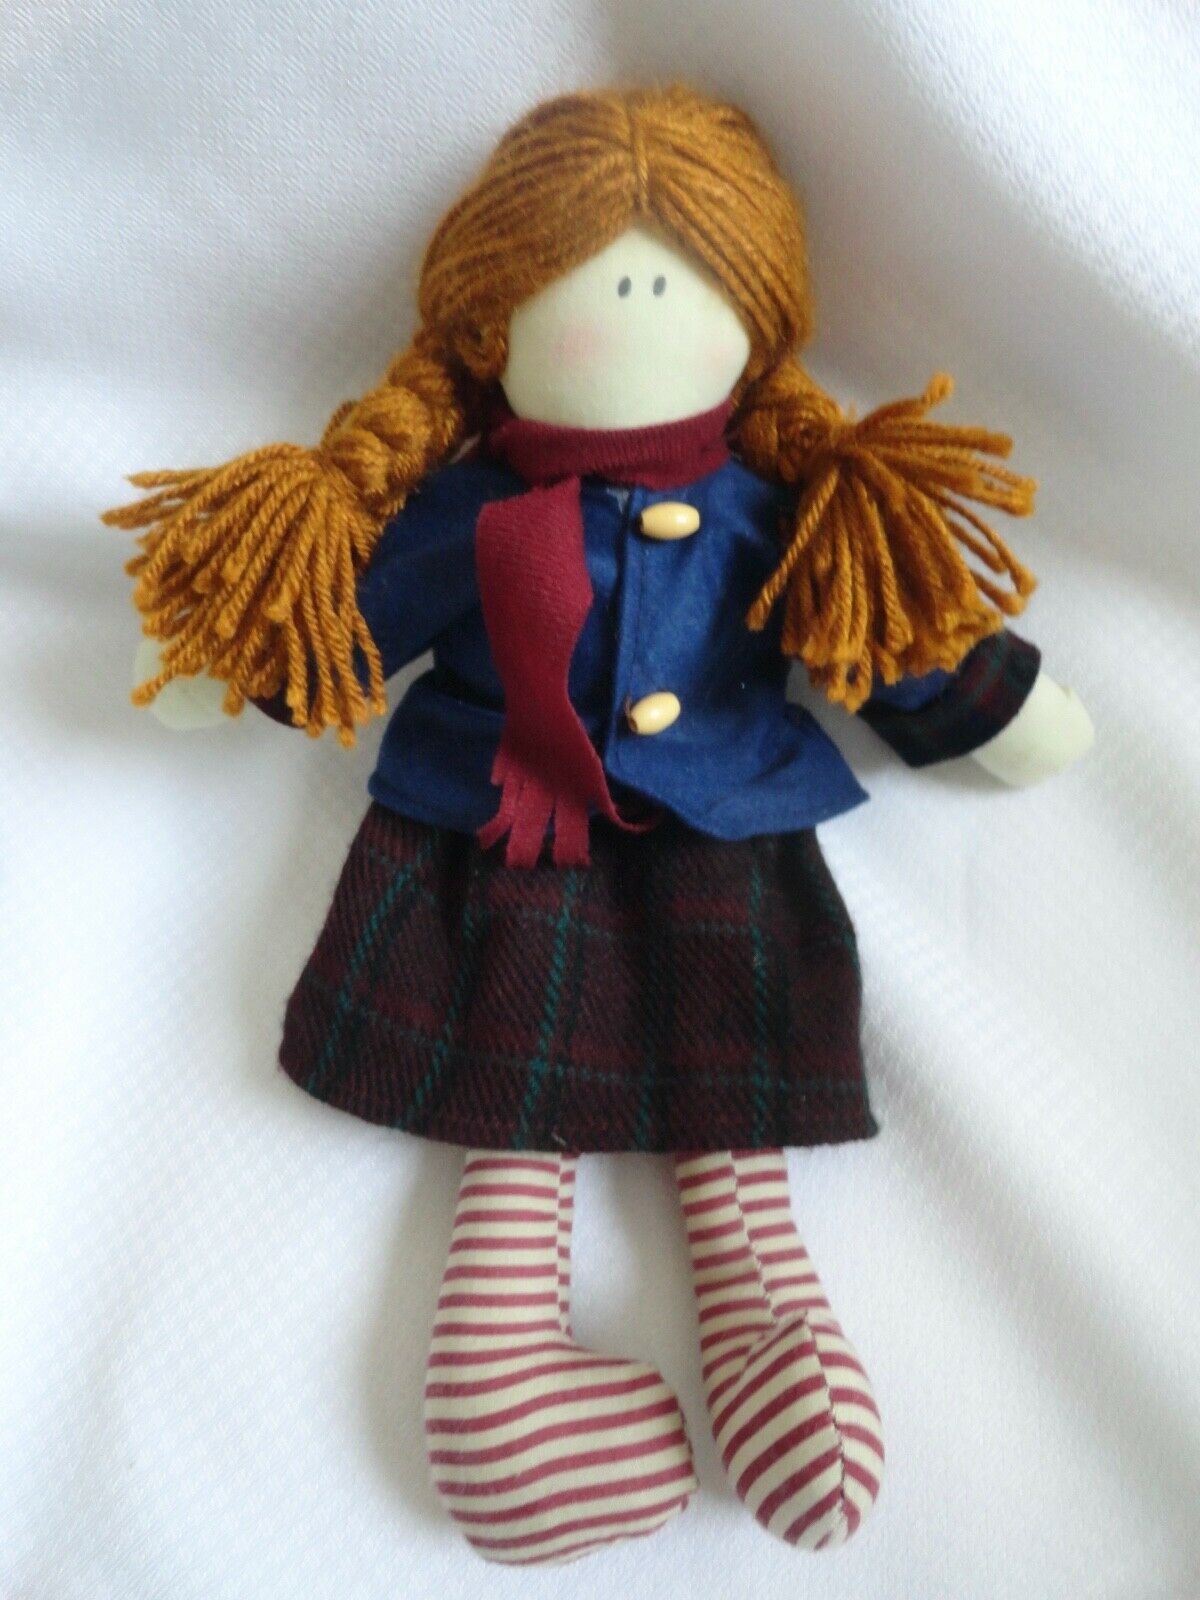 Soft Sculpture 12" Doll With Red Hair Wool Shirt,skirt And Scarf